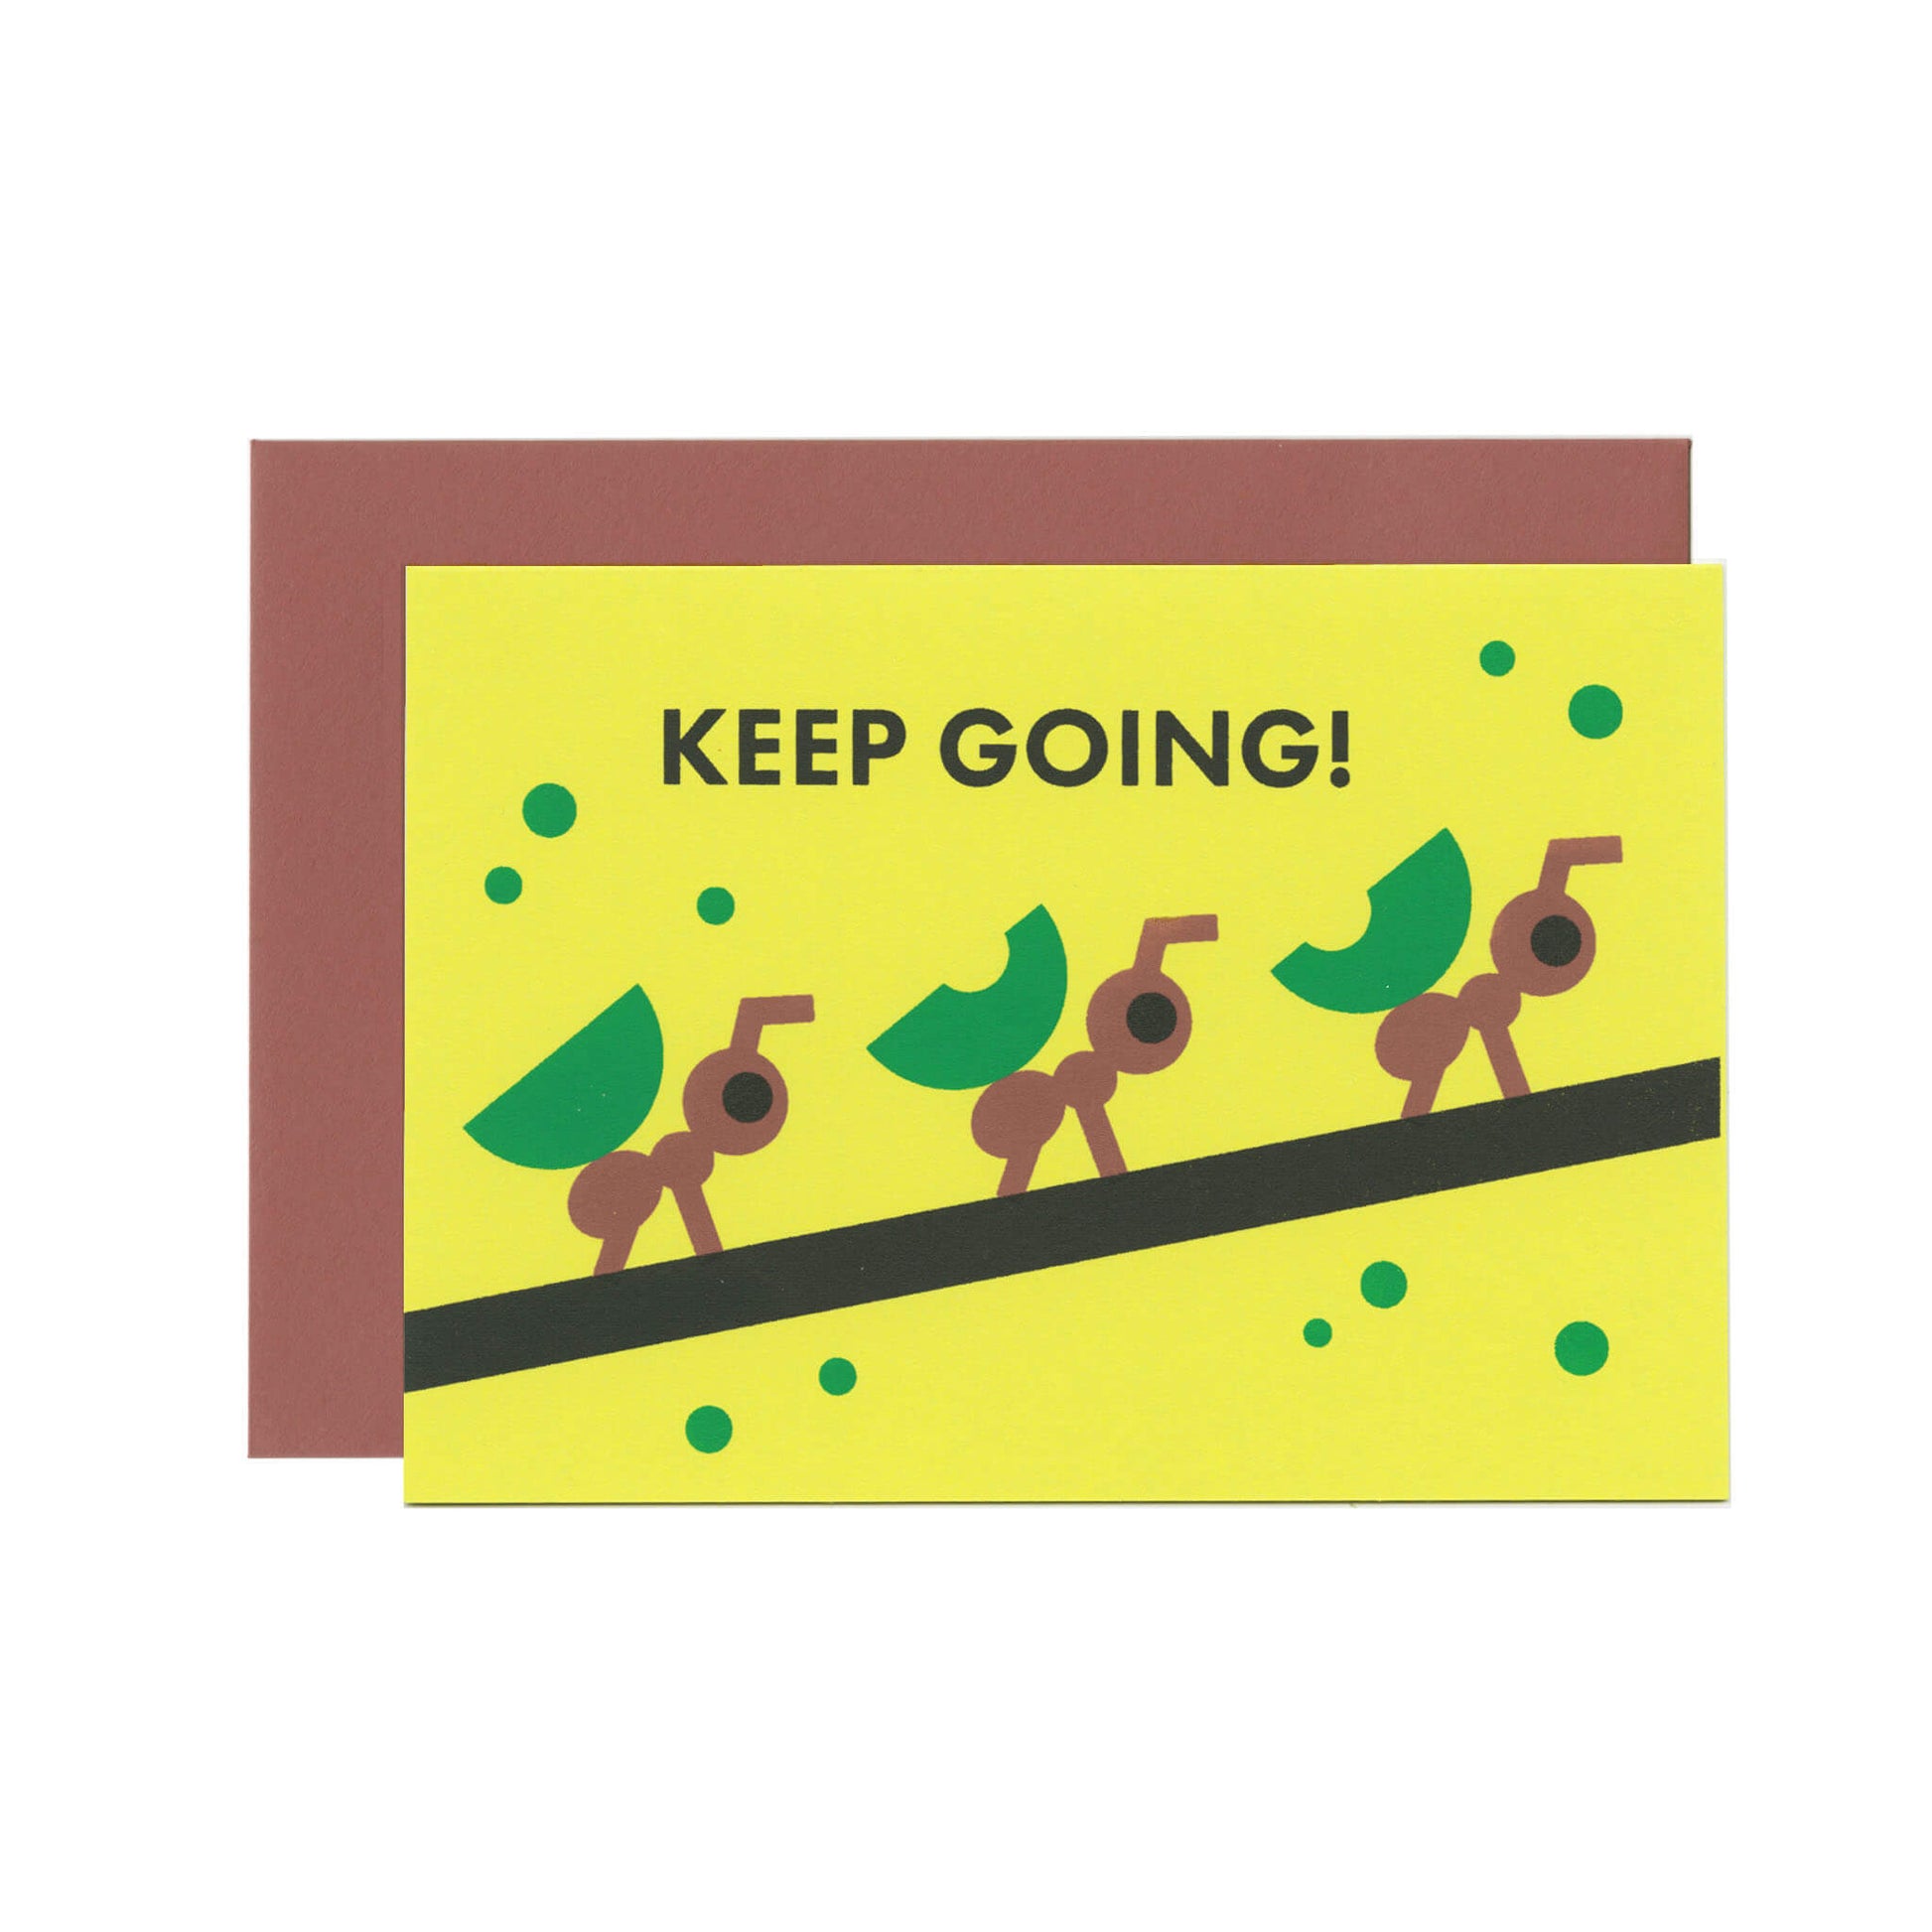 A yellow-green greeting card with a text that reads "Keep going!" and an illustration of ants carrying leaves in a row on a branch. There's a brown envelope behind the card.